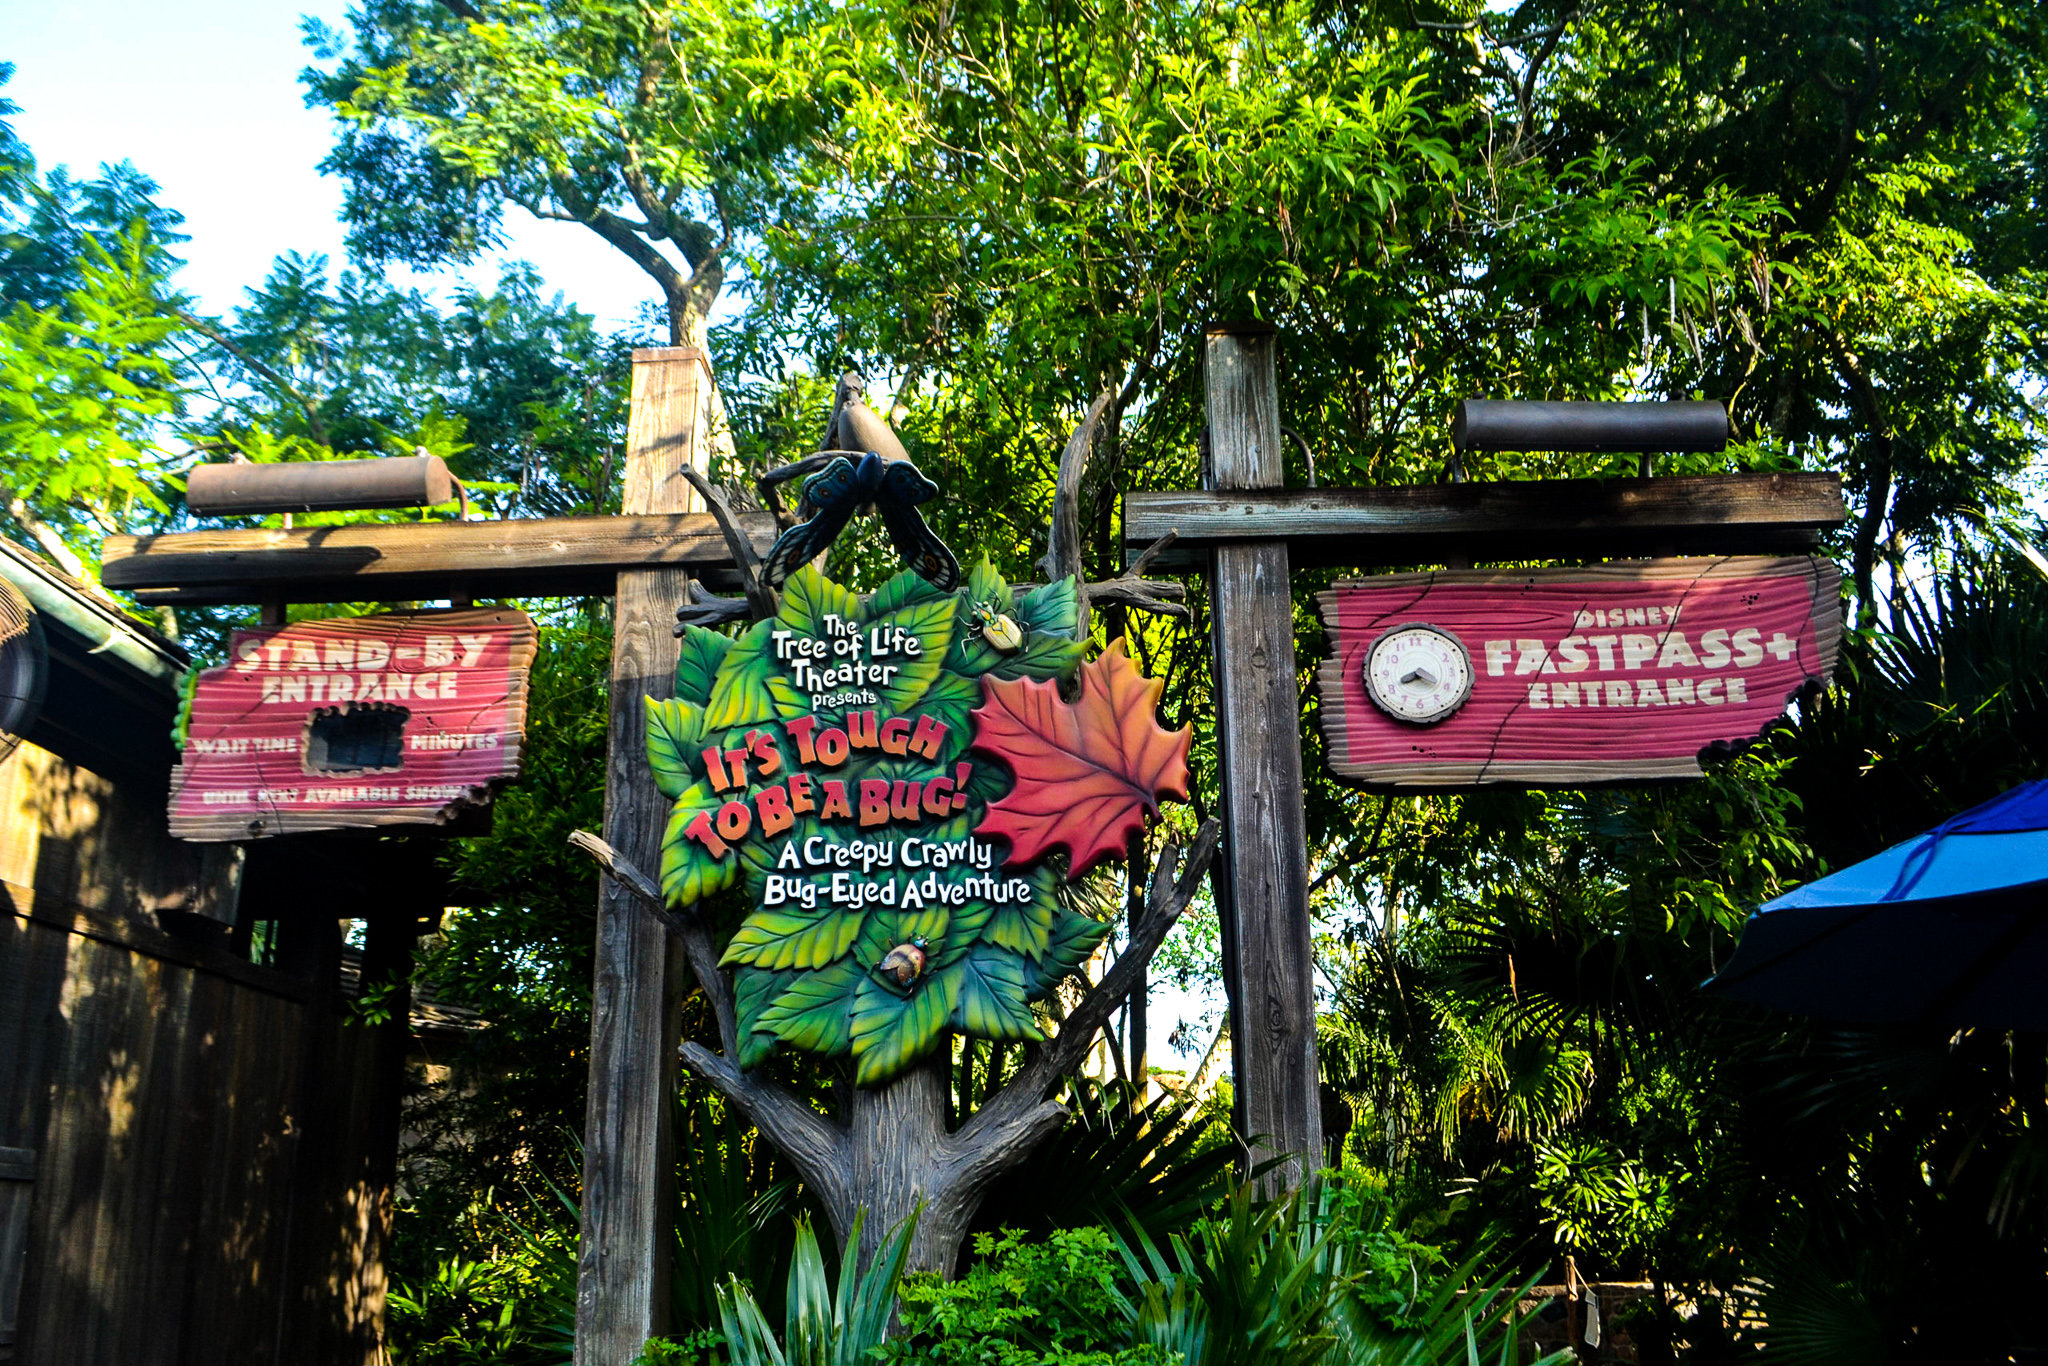 It's Tough To Be A Bug entrance in Animal Kingdom